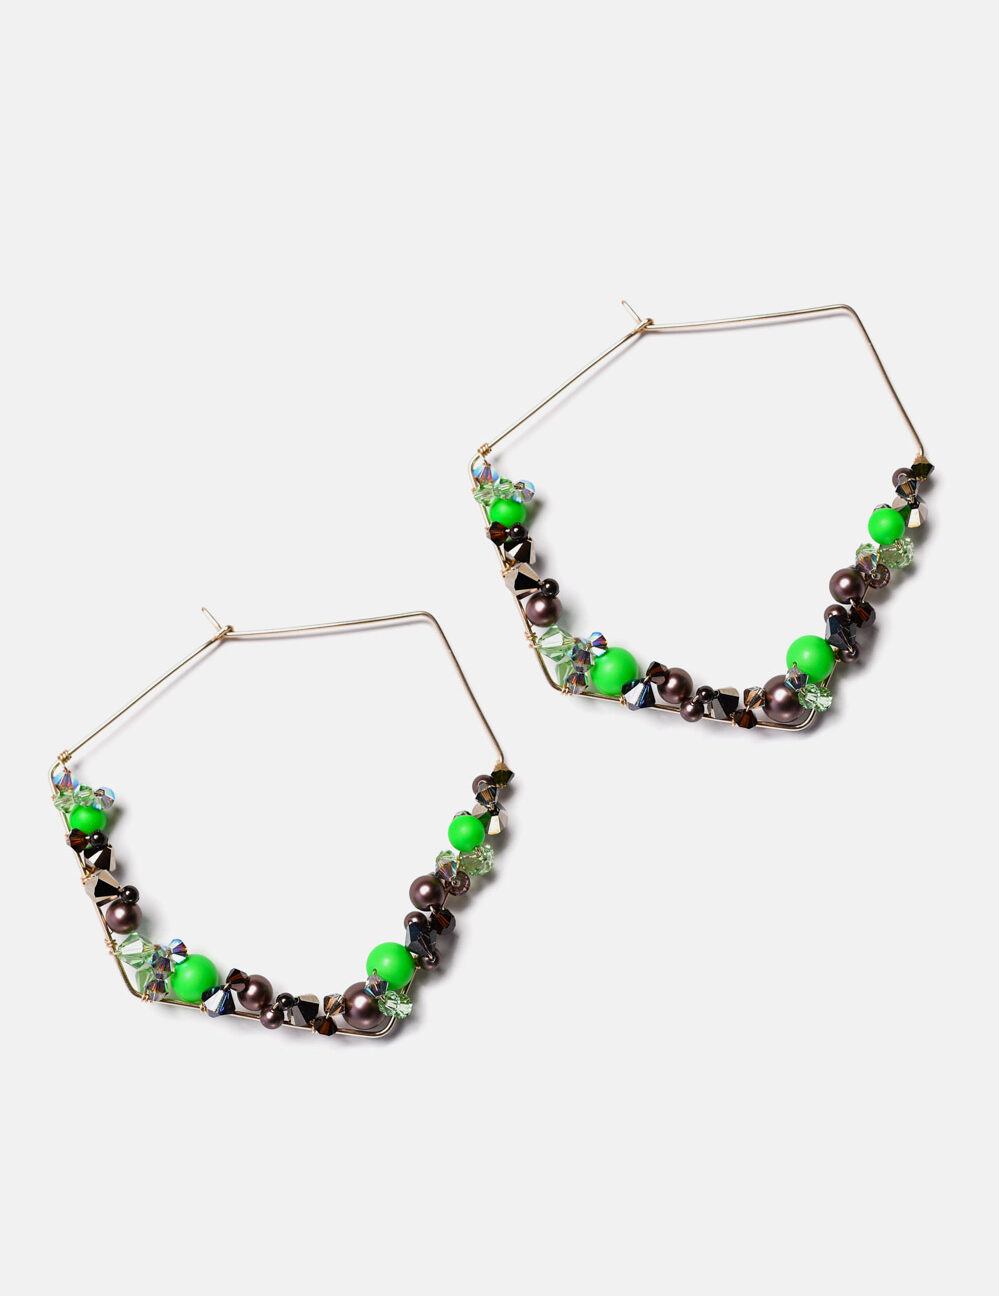 14k gold filled earrings with neon green pearls and colorful crystals